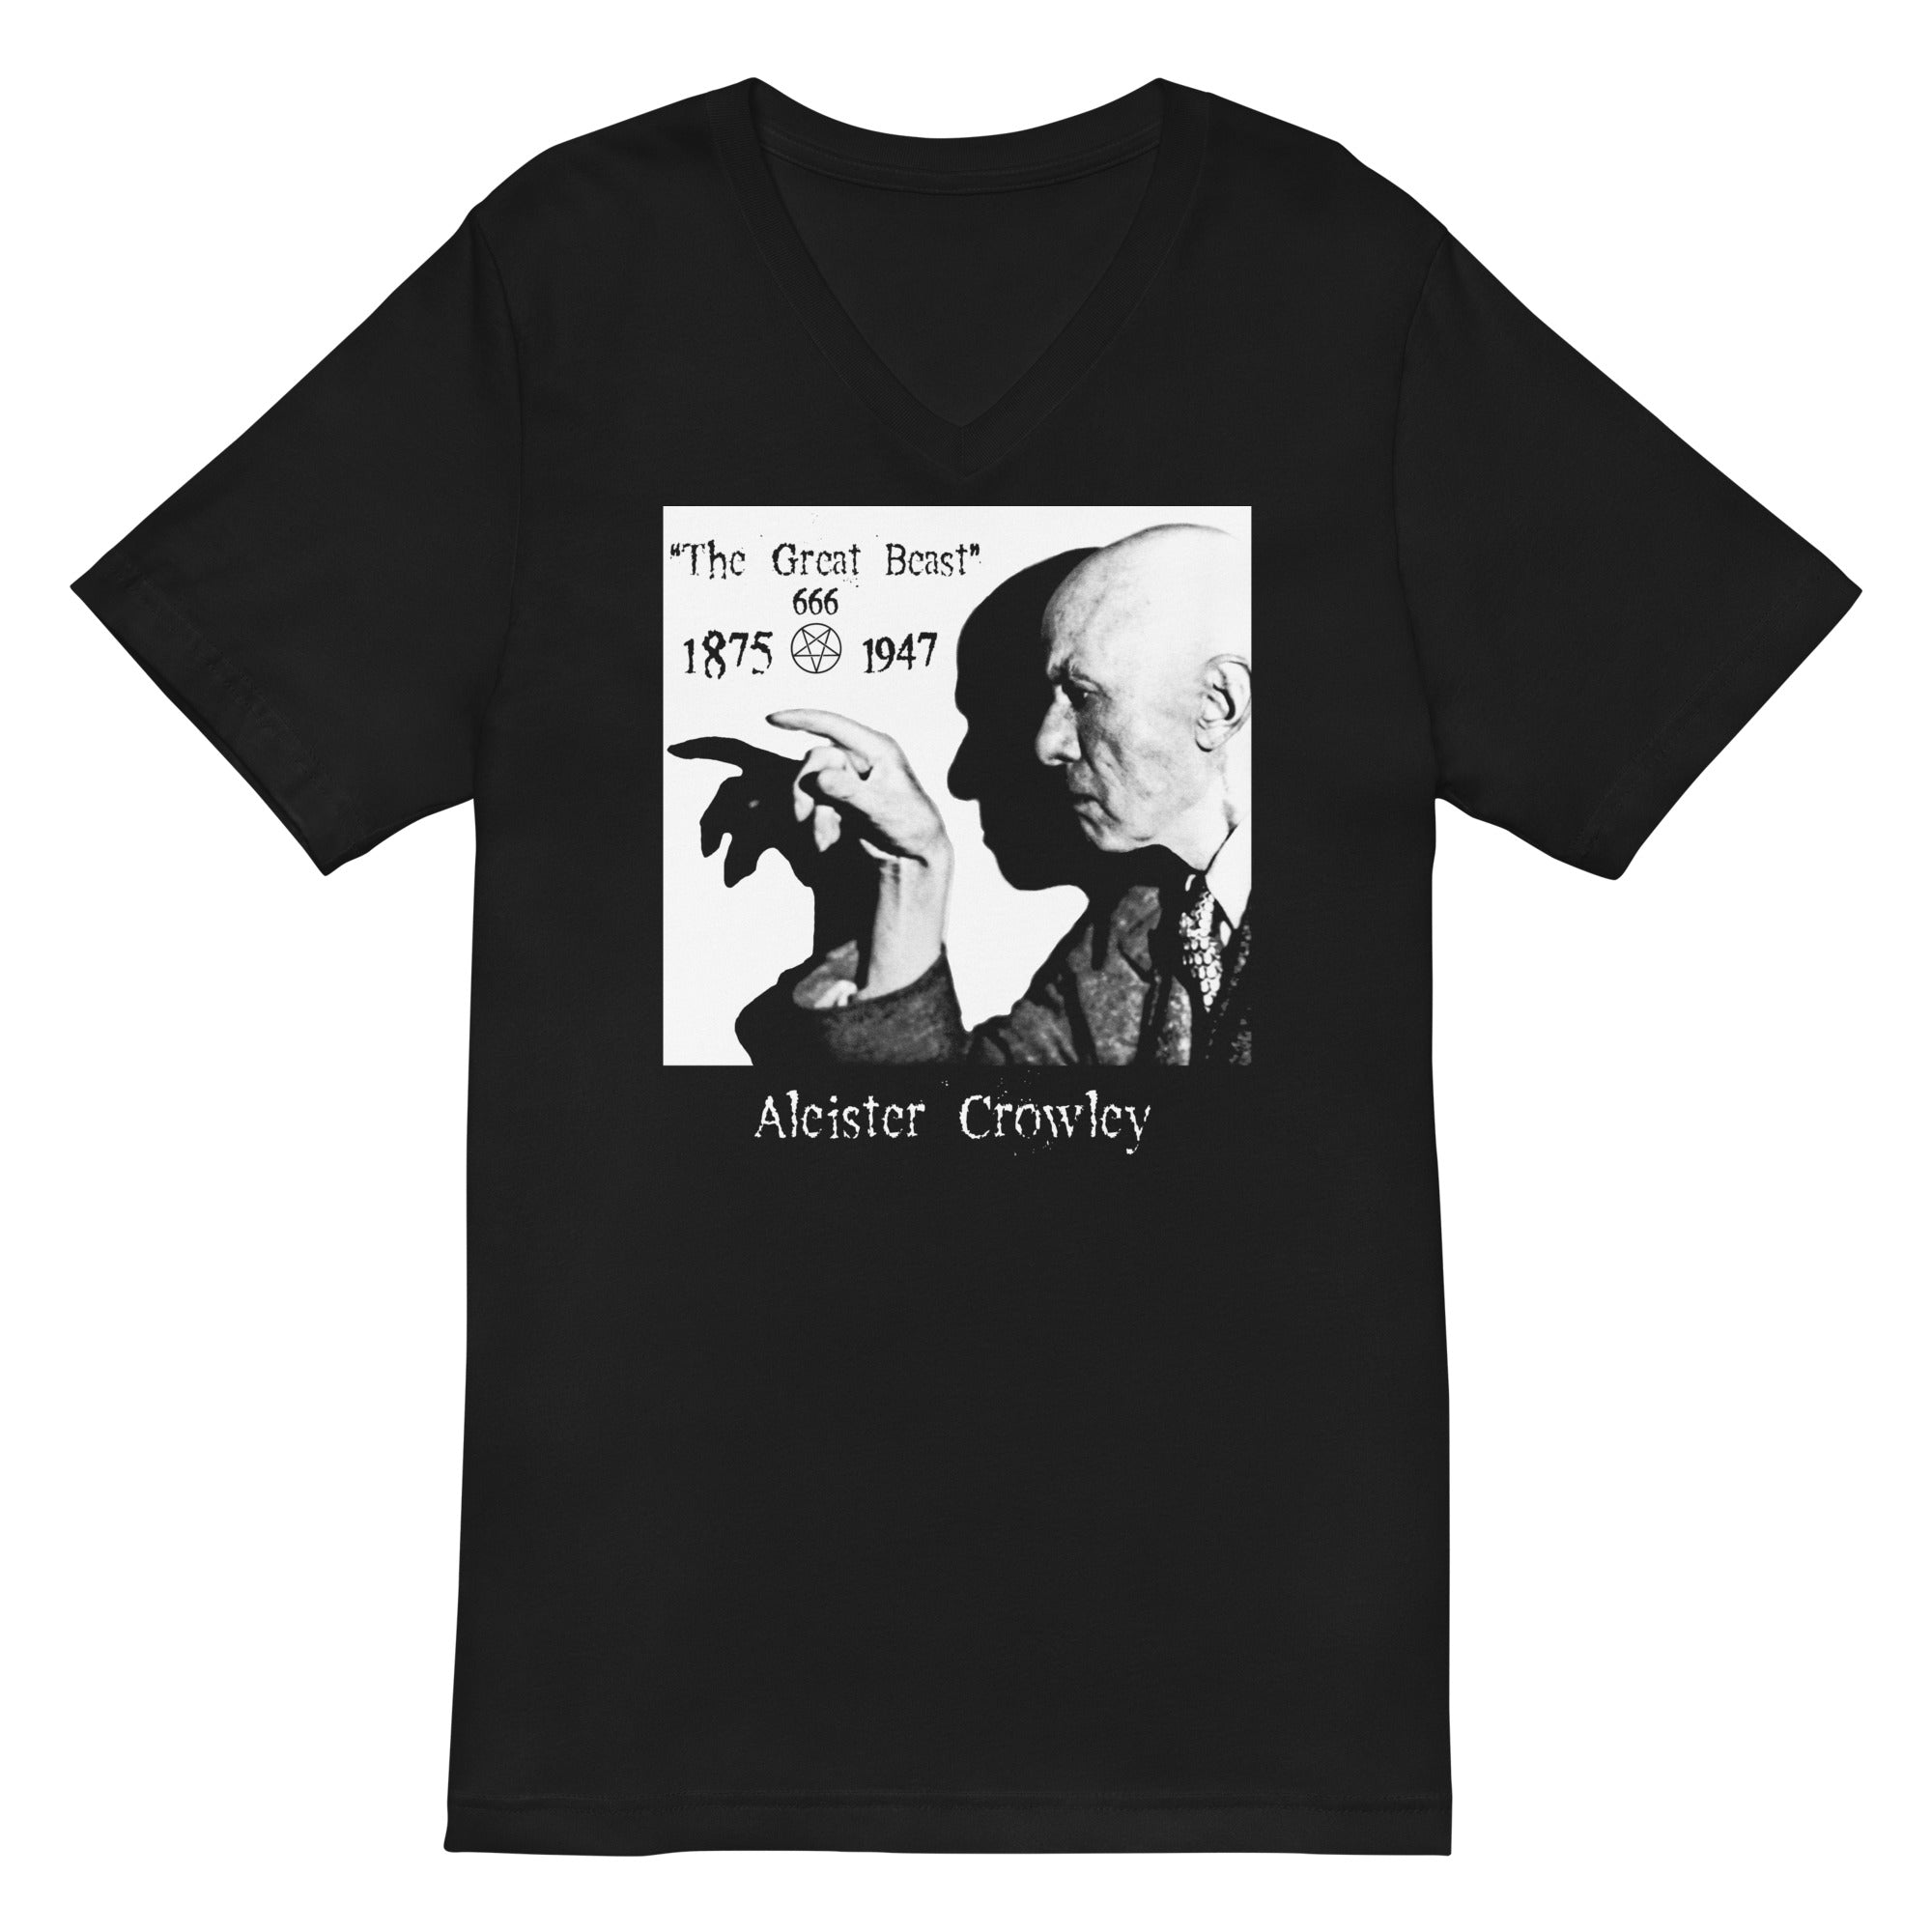 Aleister Crowley Occult Leader Women's Short Sleeve V-Neck T-Shirt - Edge of Life Designs